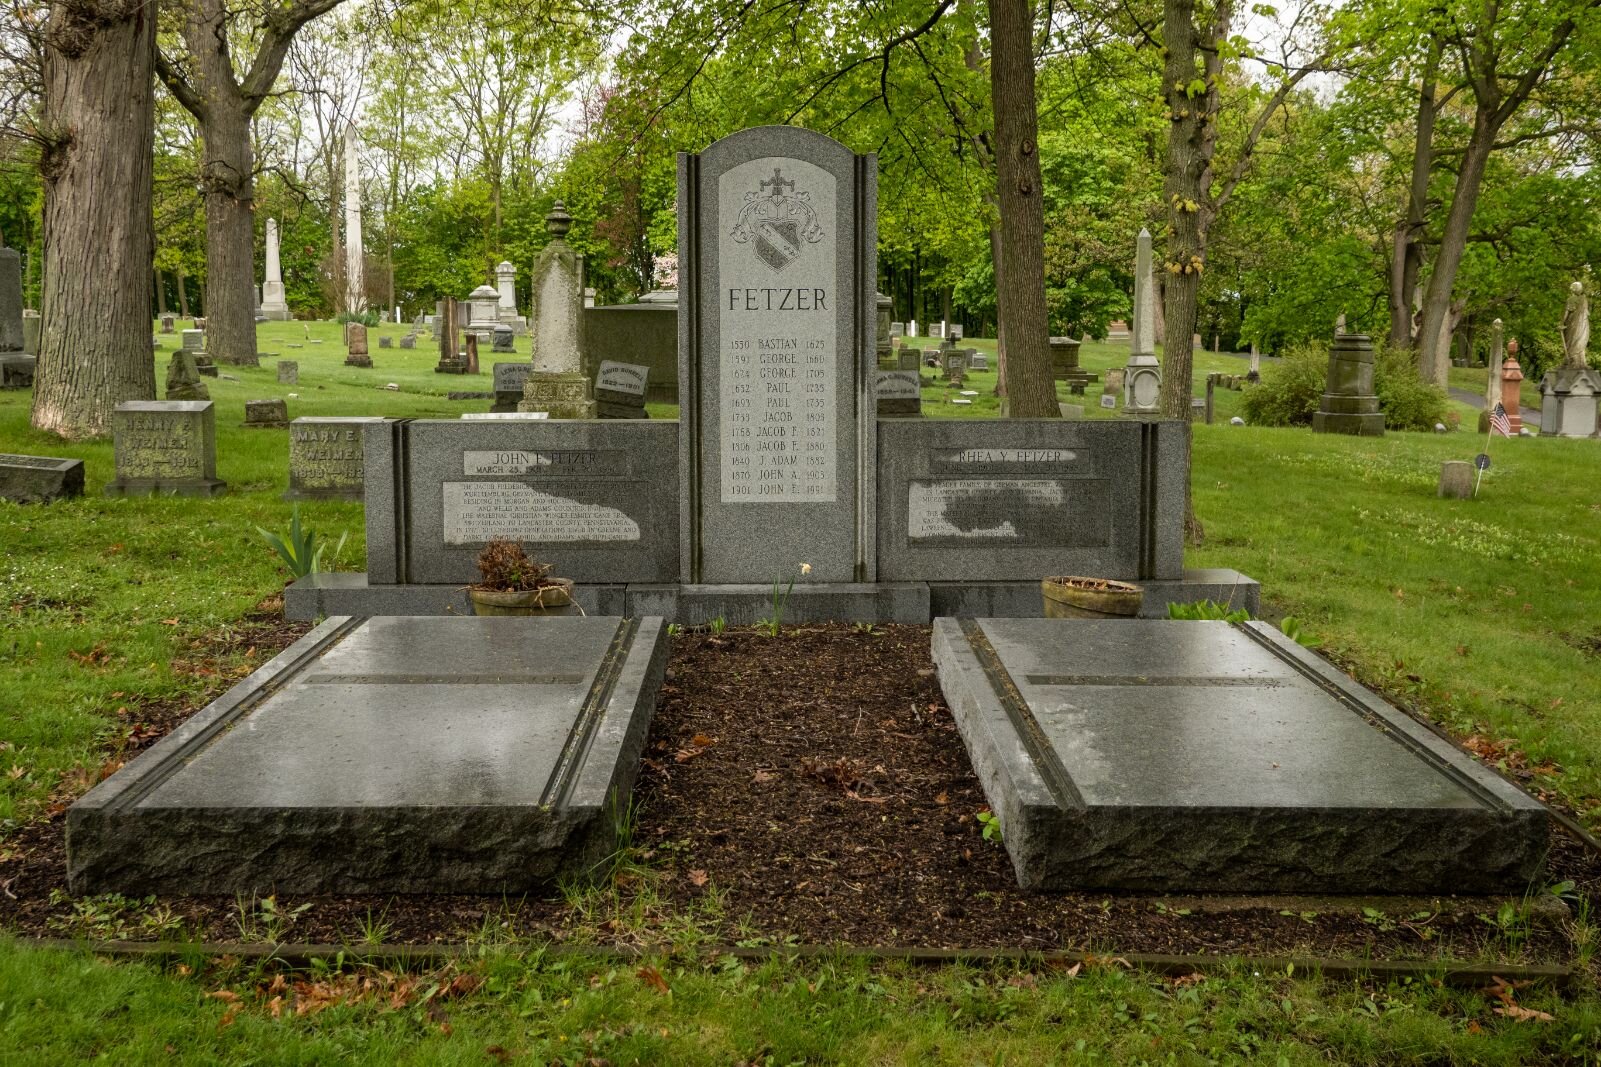 Anywhere a member of his family was buried, businessman John Fetzer made a point of including a headstone that showed the genealogy of his family going back to the 16th century.